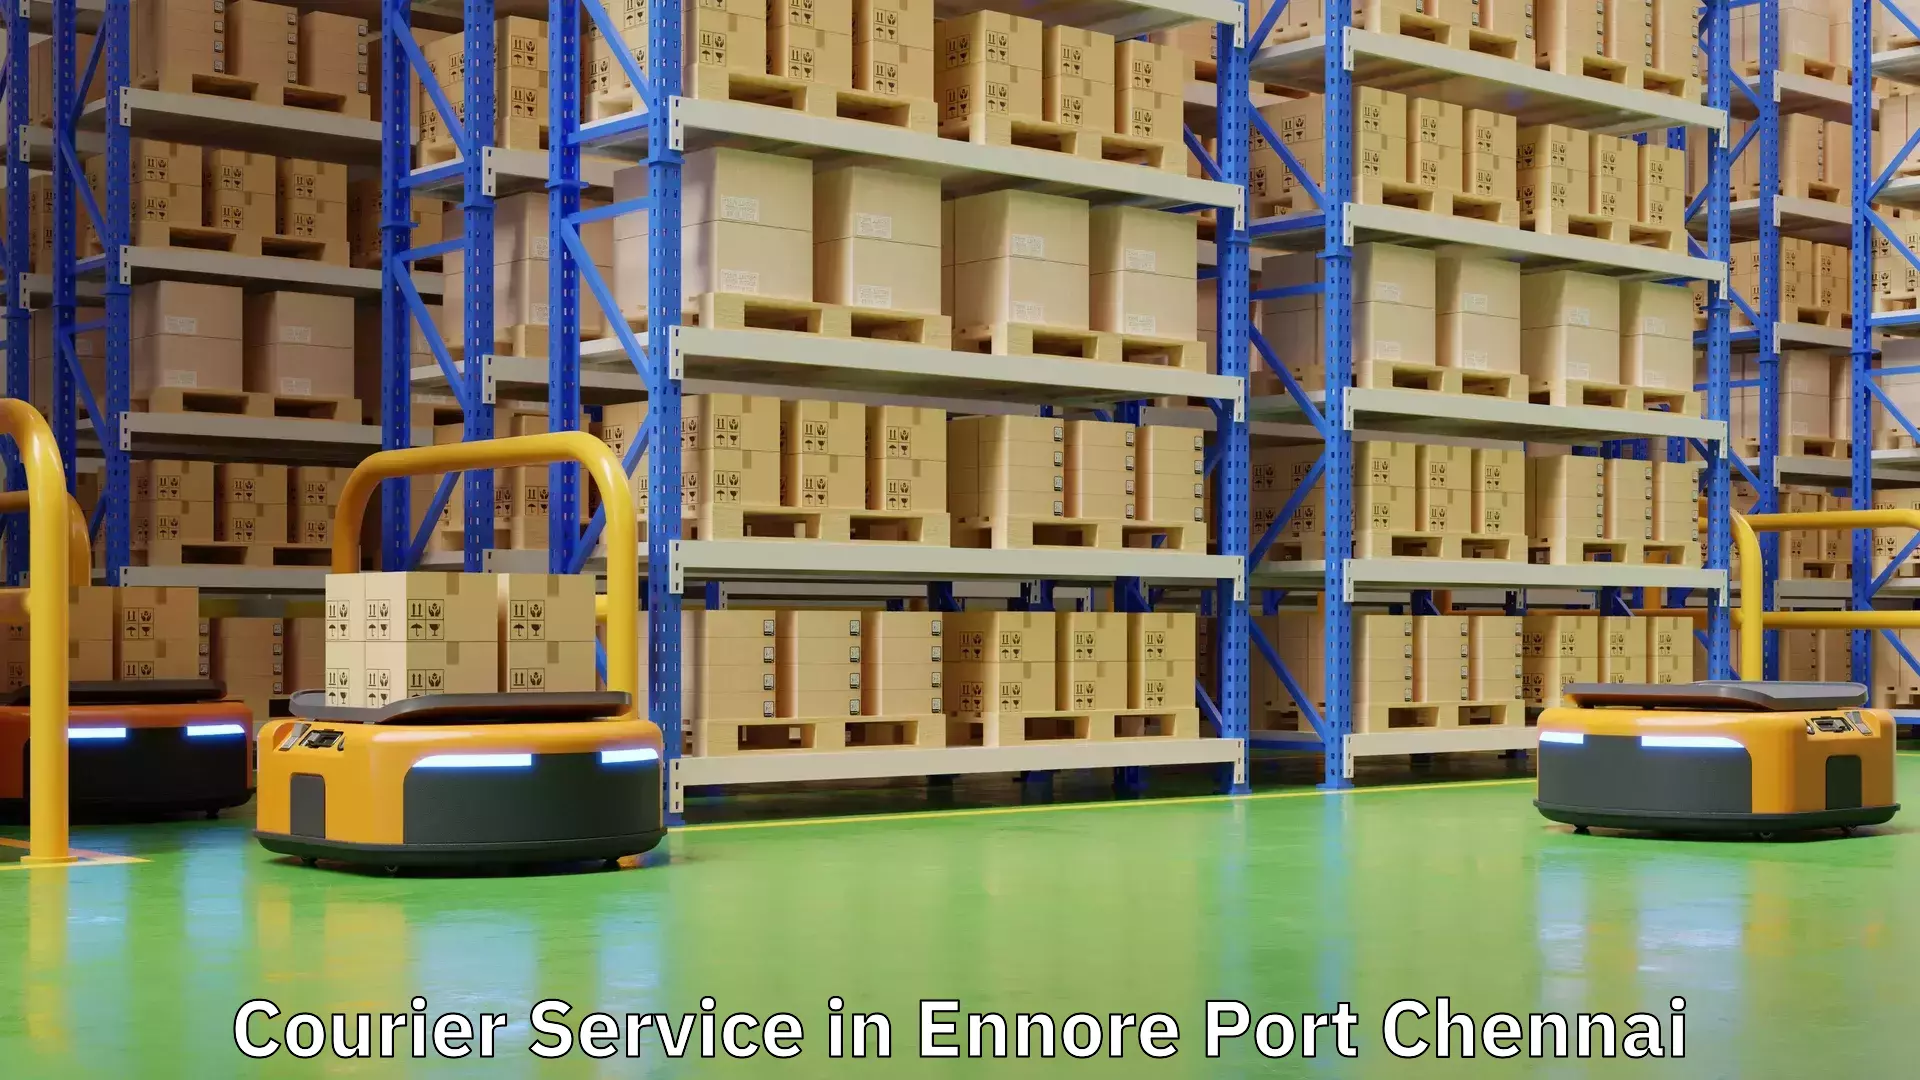 Affordable logistics services in Ennore Port Chennai